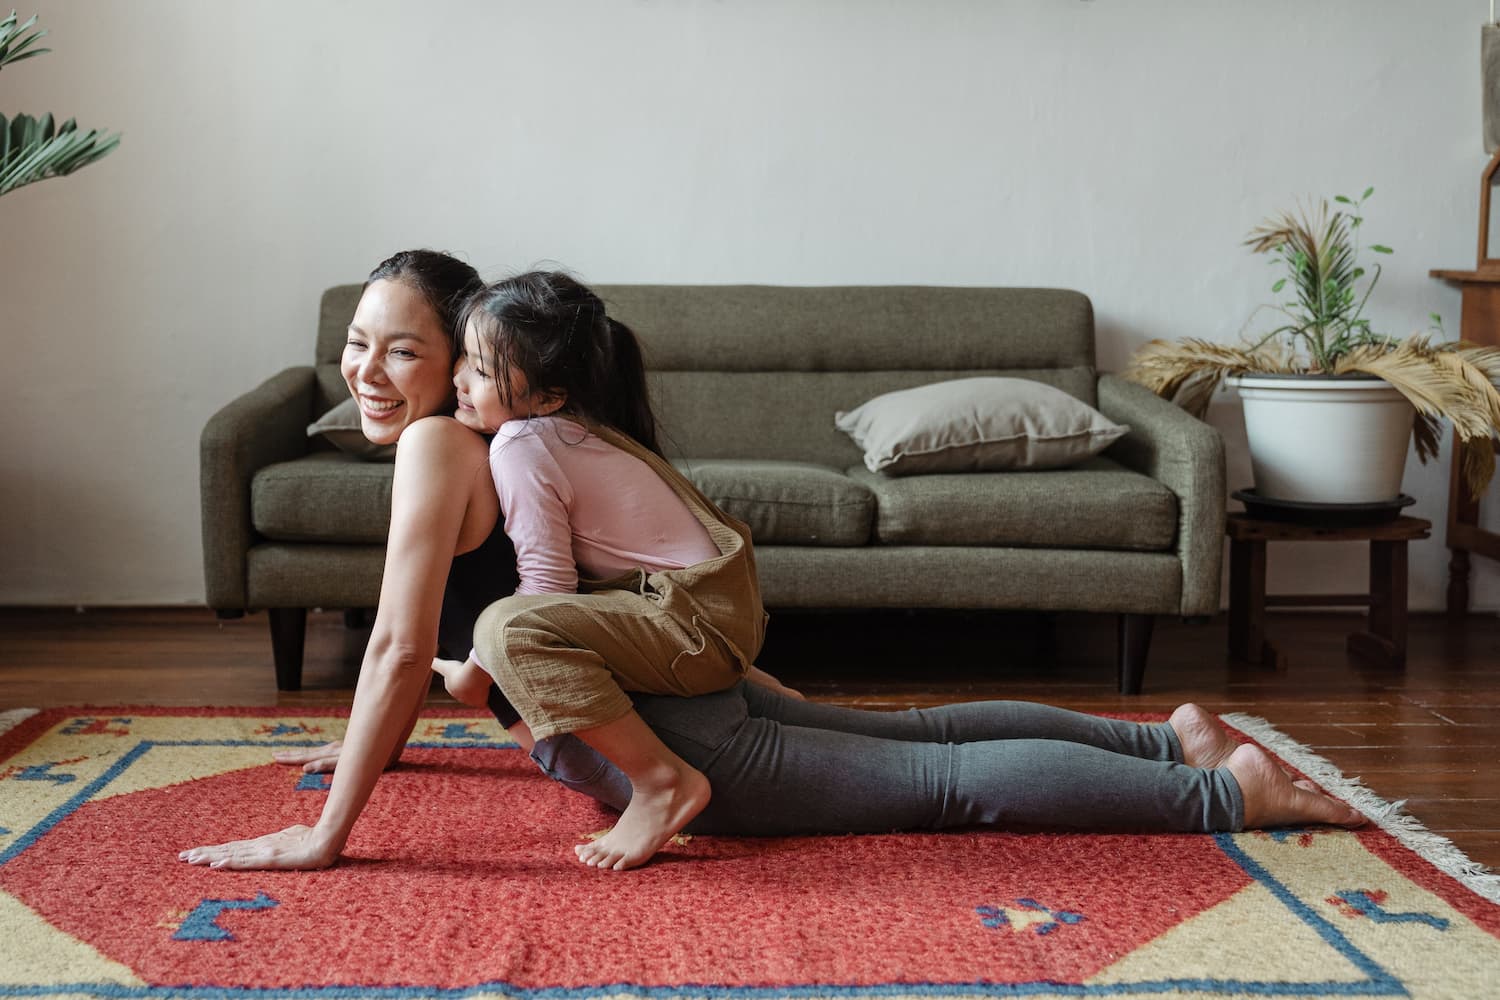 IDOY 2021: Yoga at home and Yoga with Family